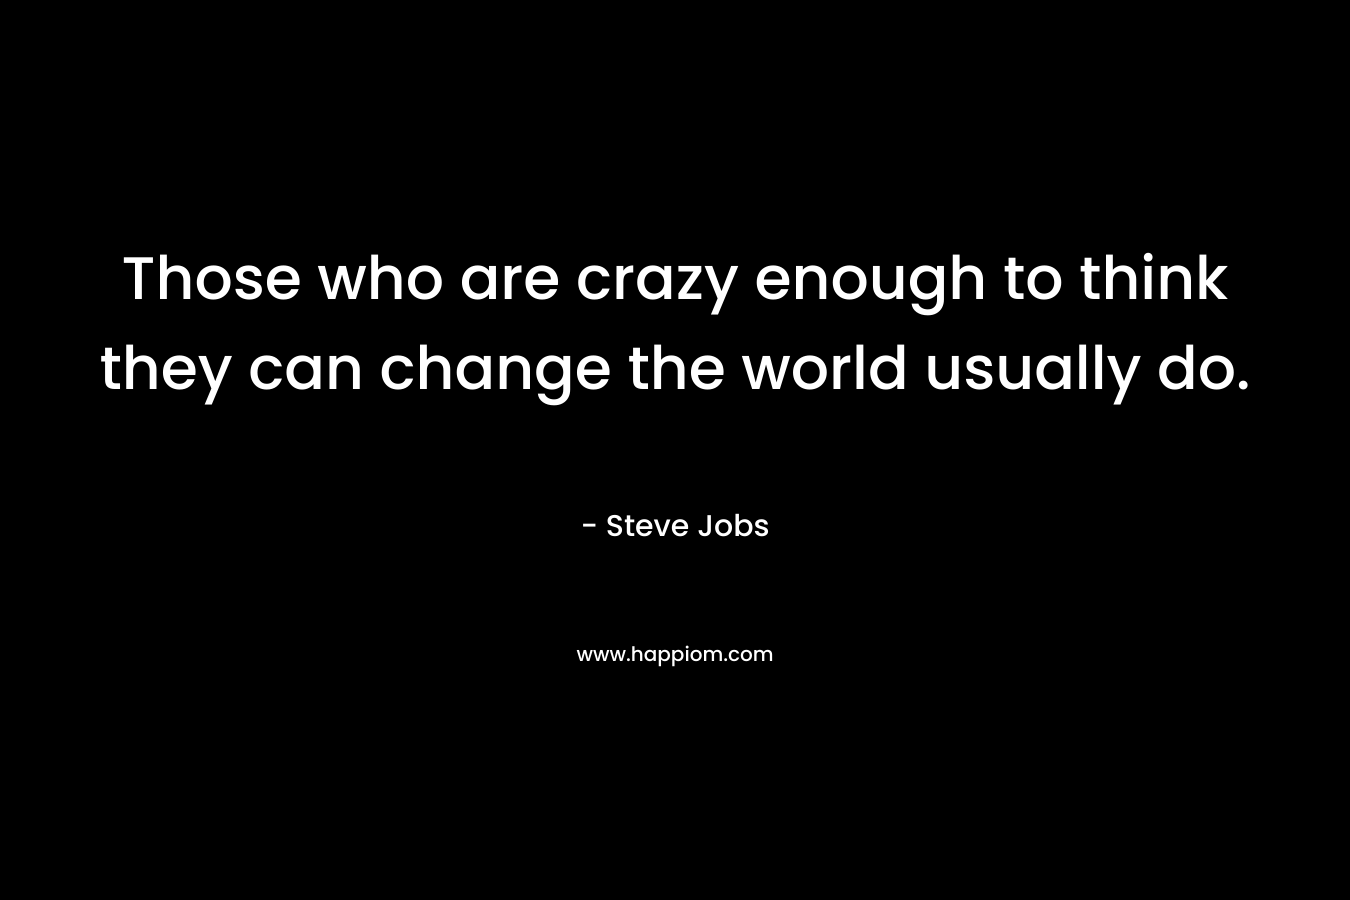 Those who are crazy enough to think they can change the world usually do. – Steve Jobs